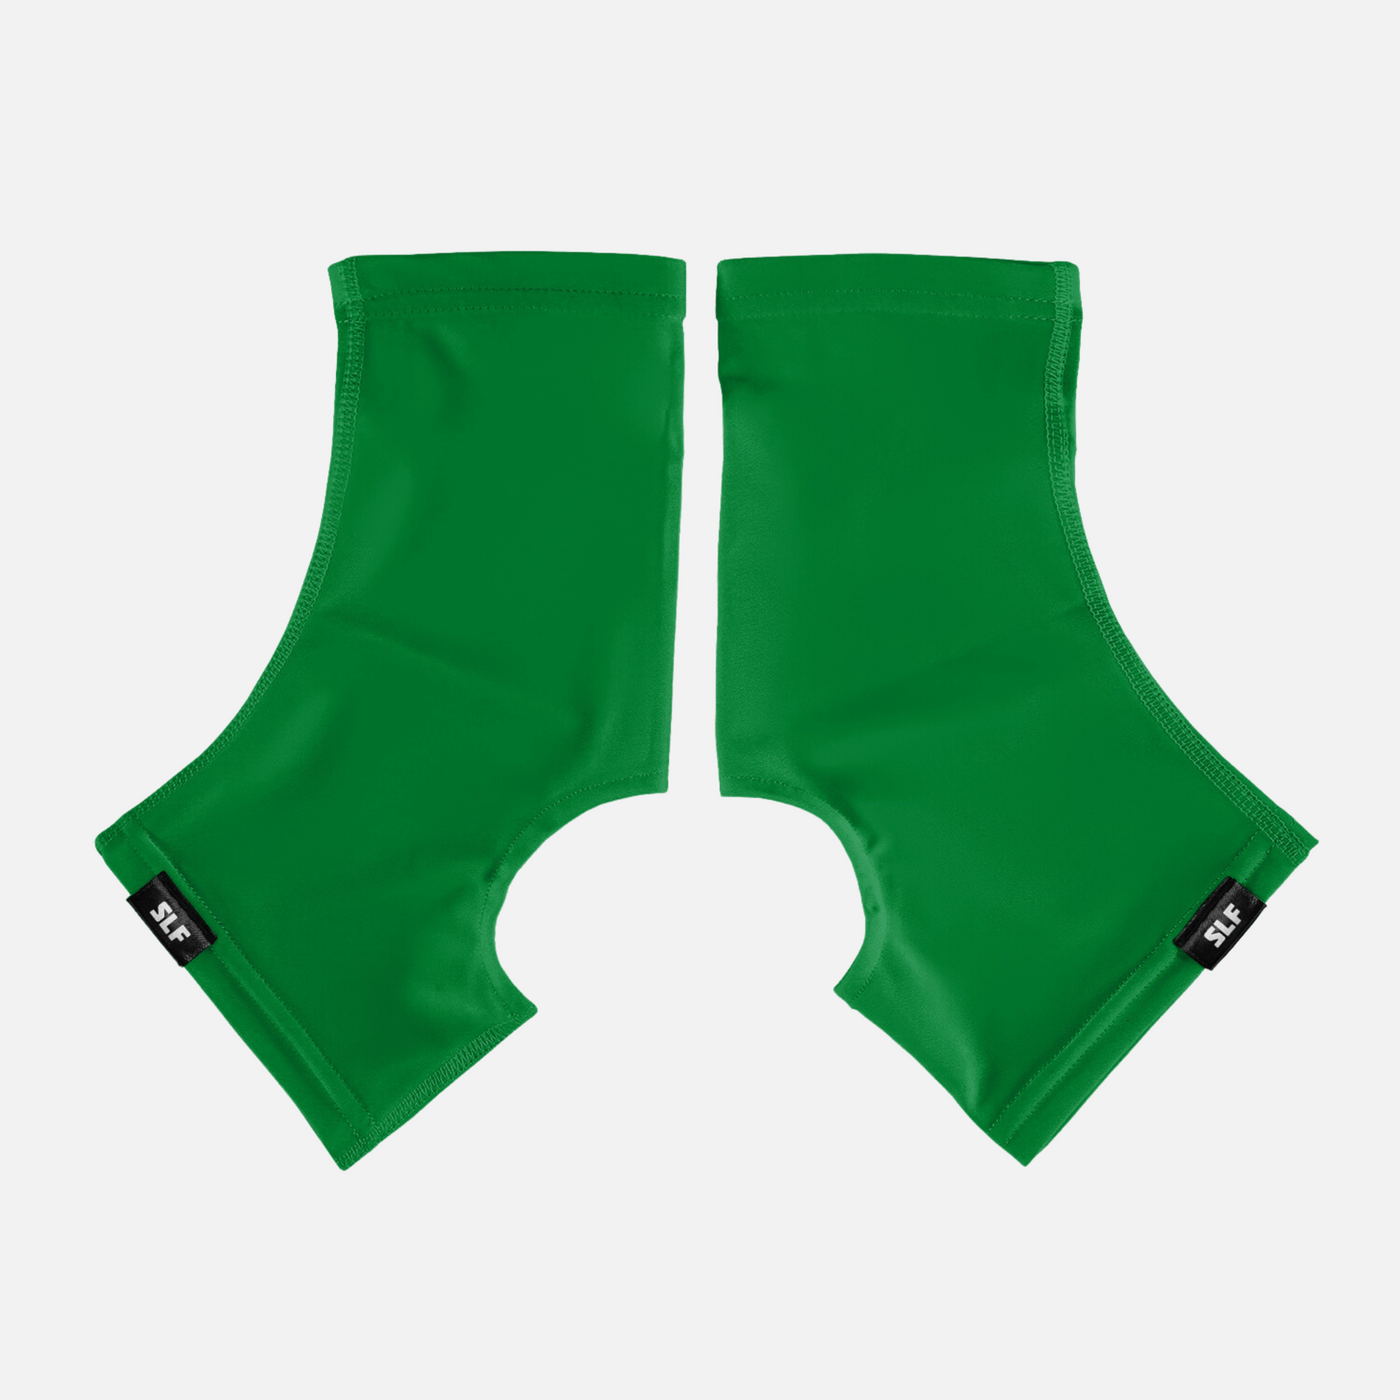 Hue Green Spats / Cleat Covers - Big